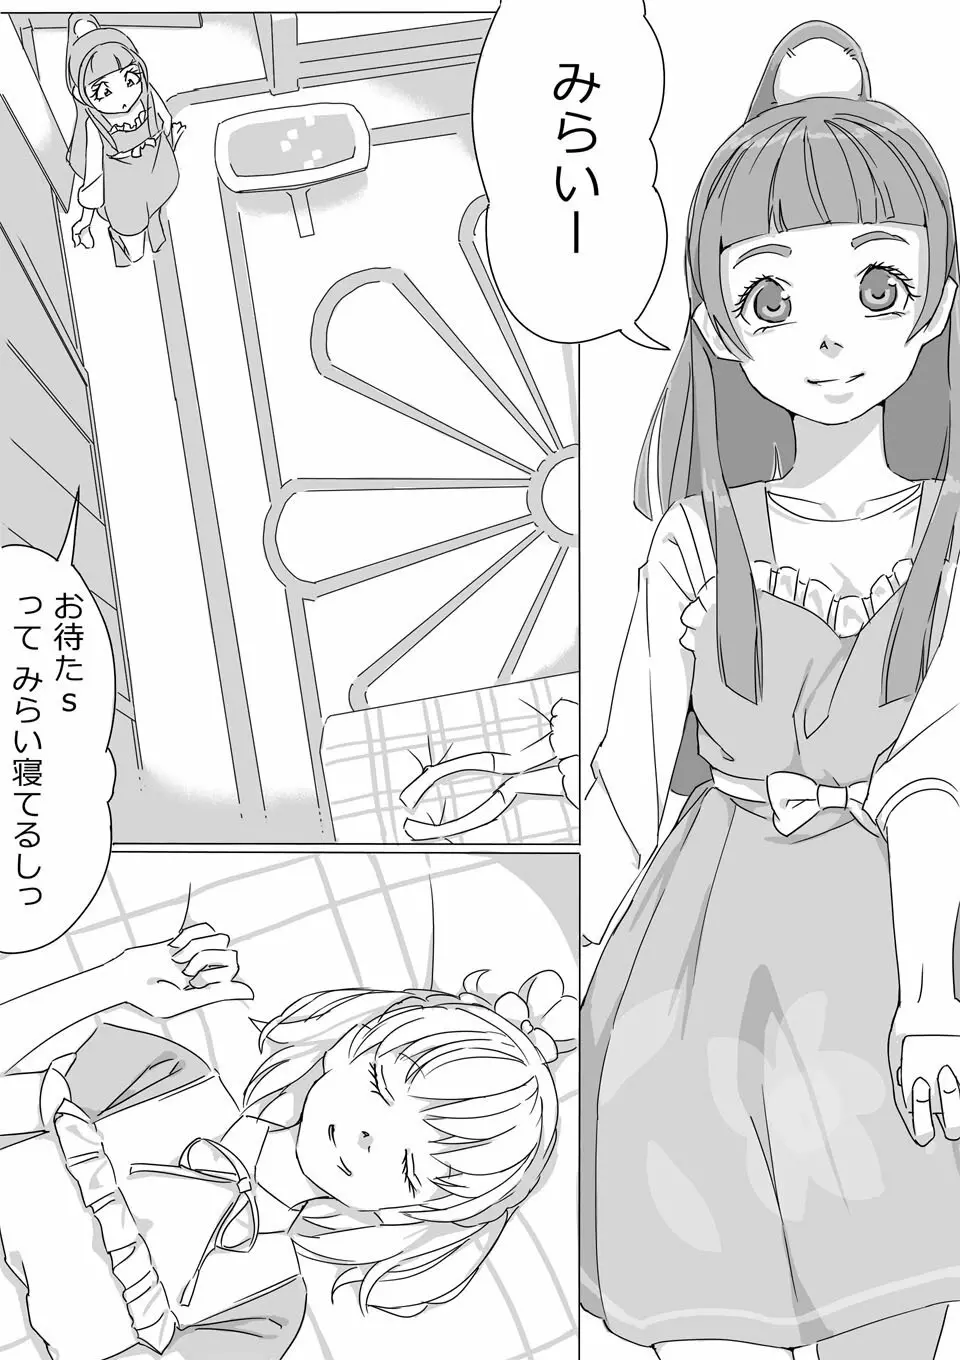 Untitled Precure Doujinshi Page.1